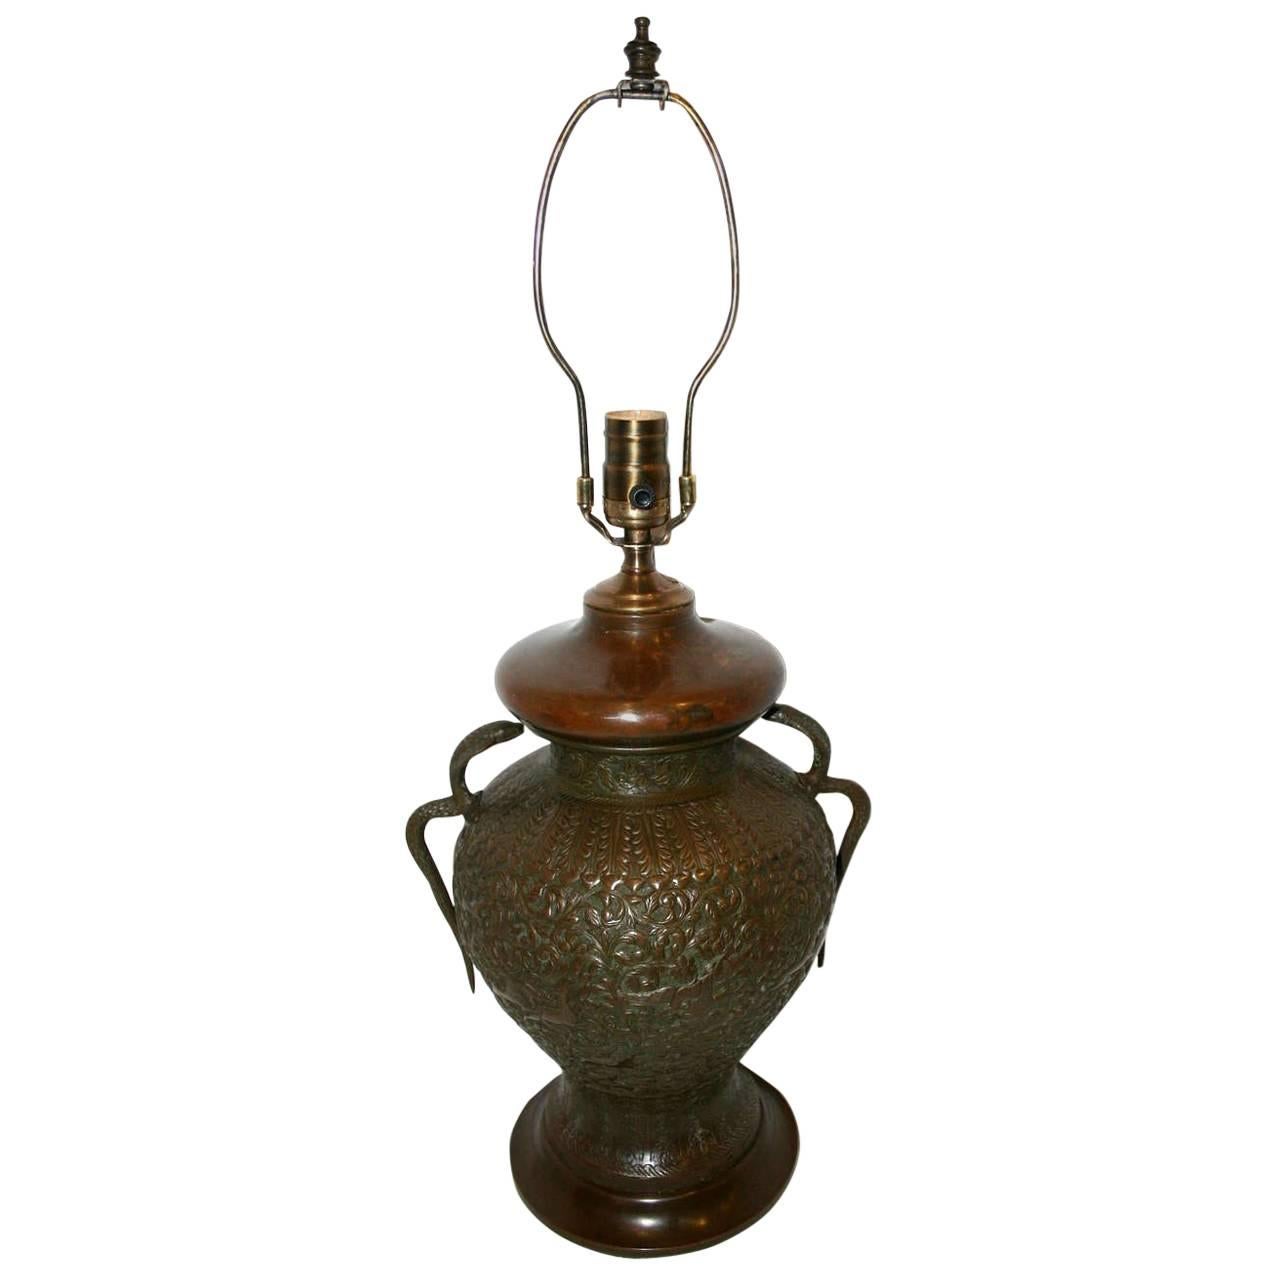  Anglo-Indian Hammered Brass Lamp